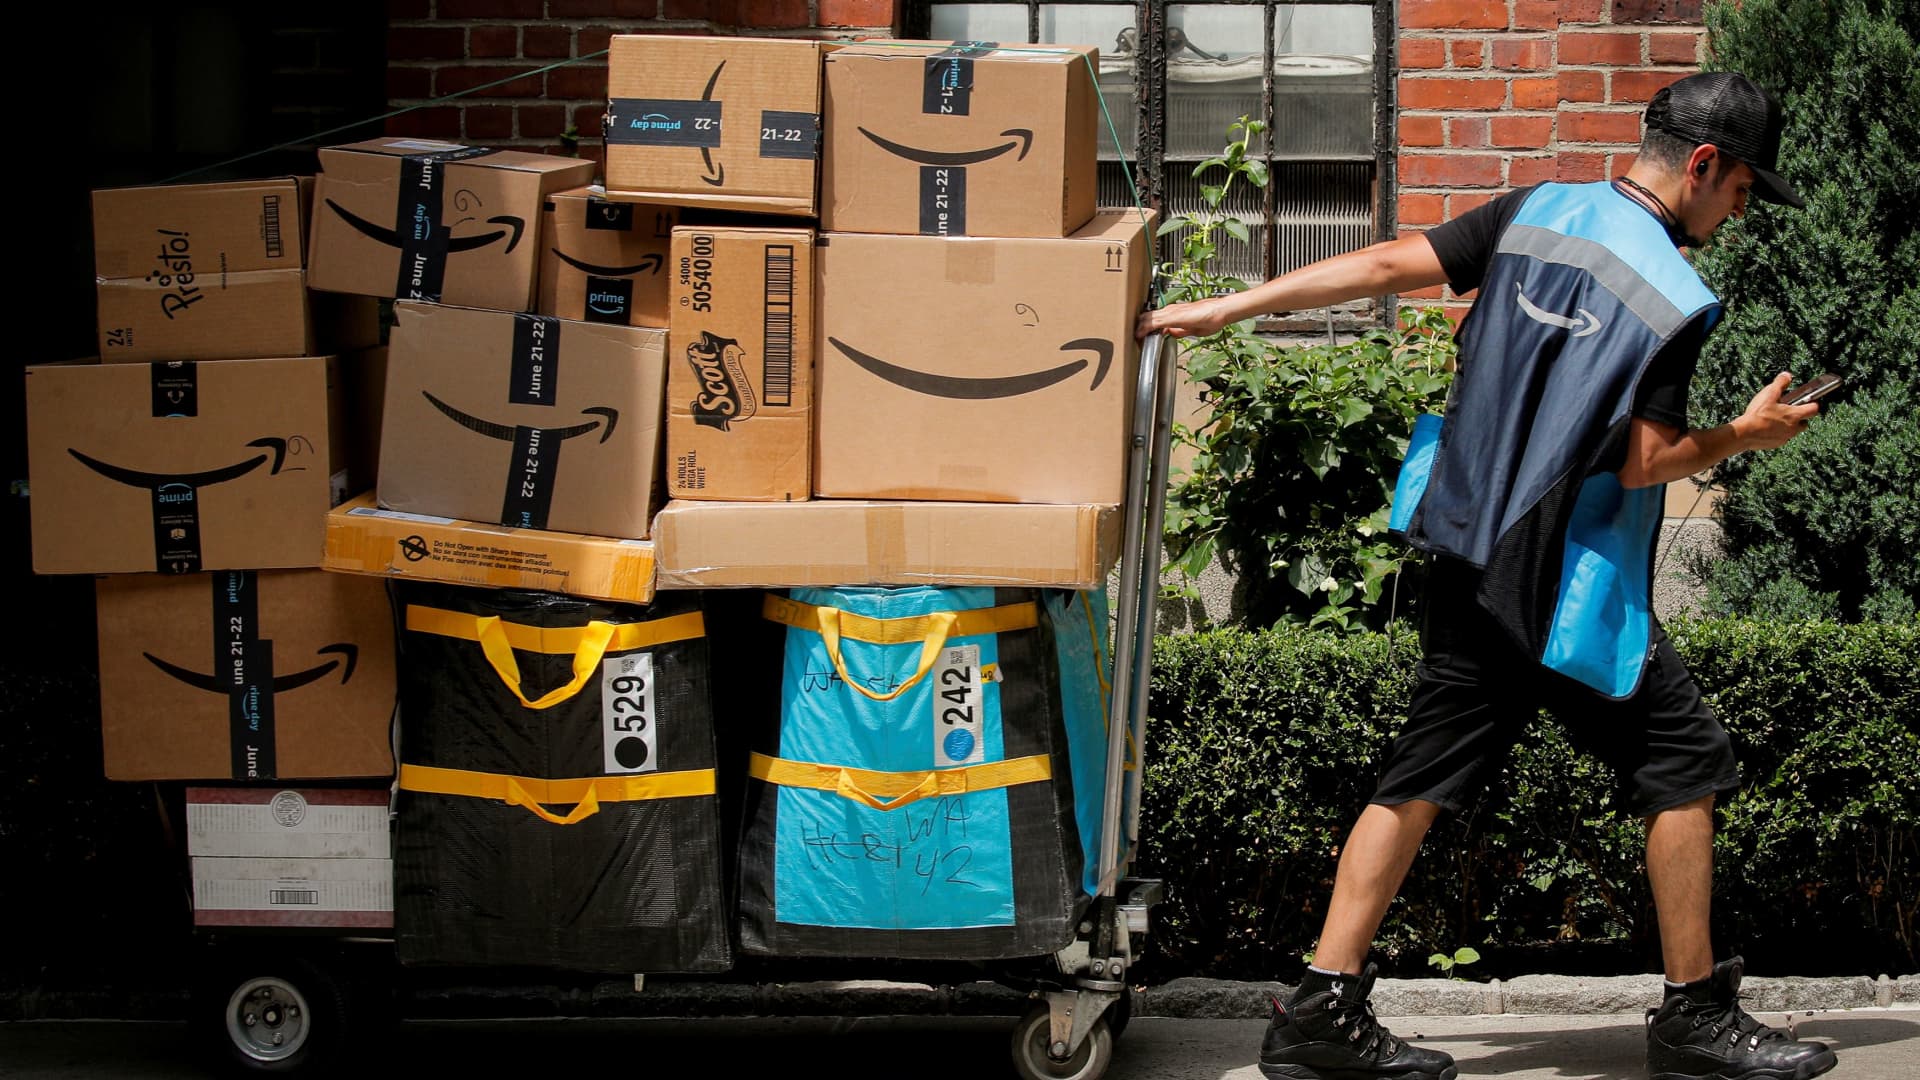 Amazon says consumer spending remains strong, bucking broader retail gloom